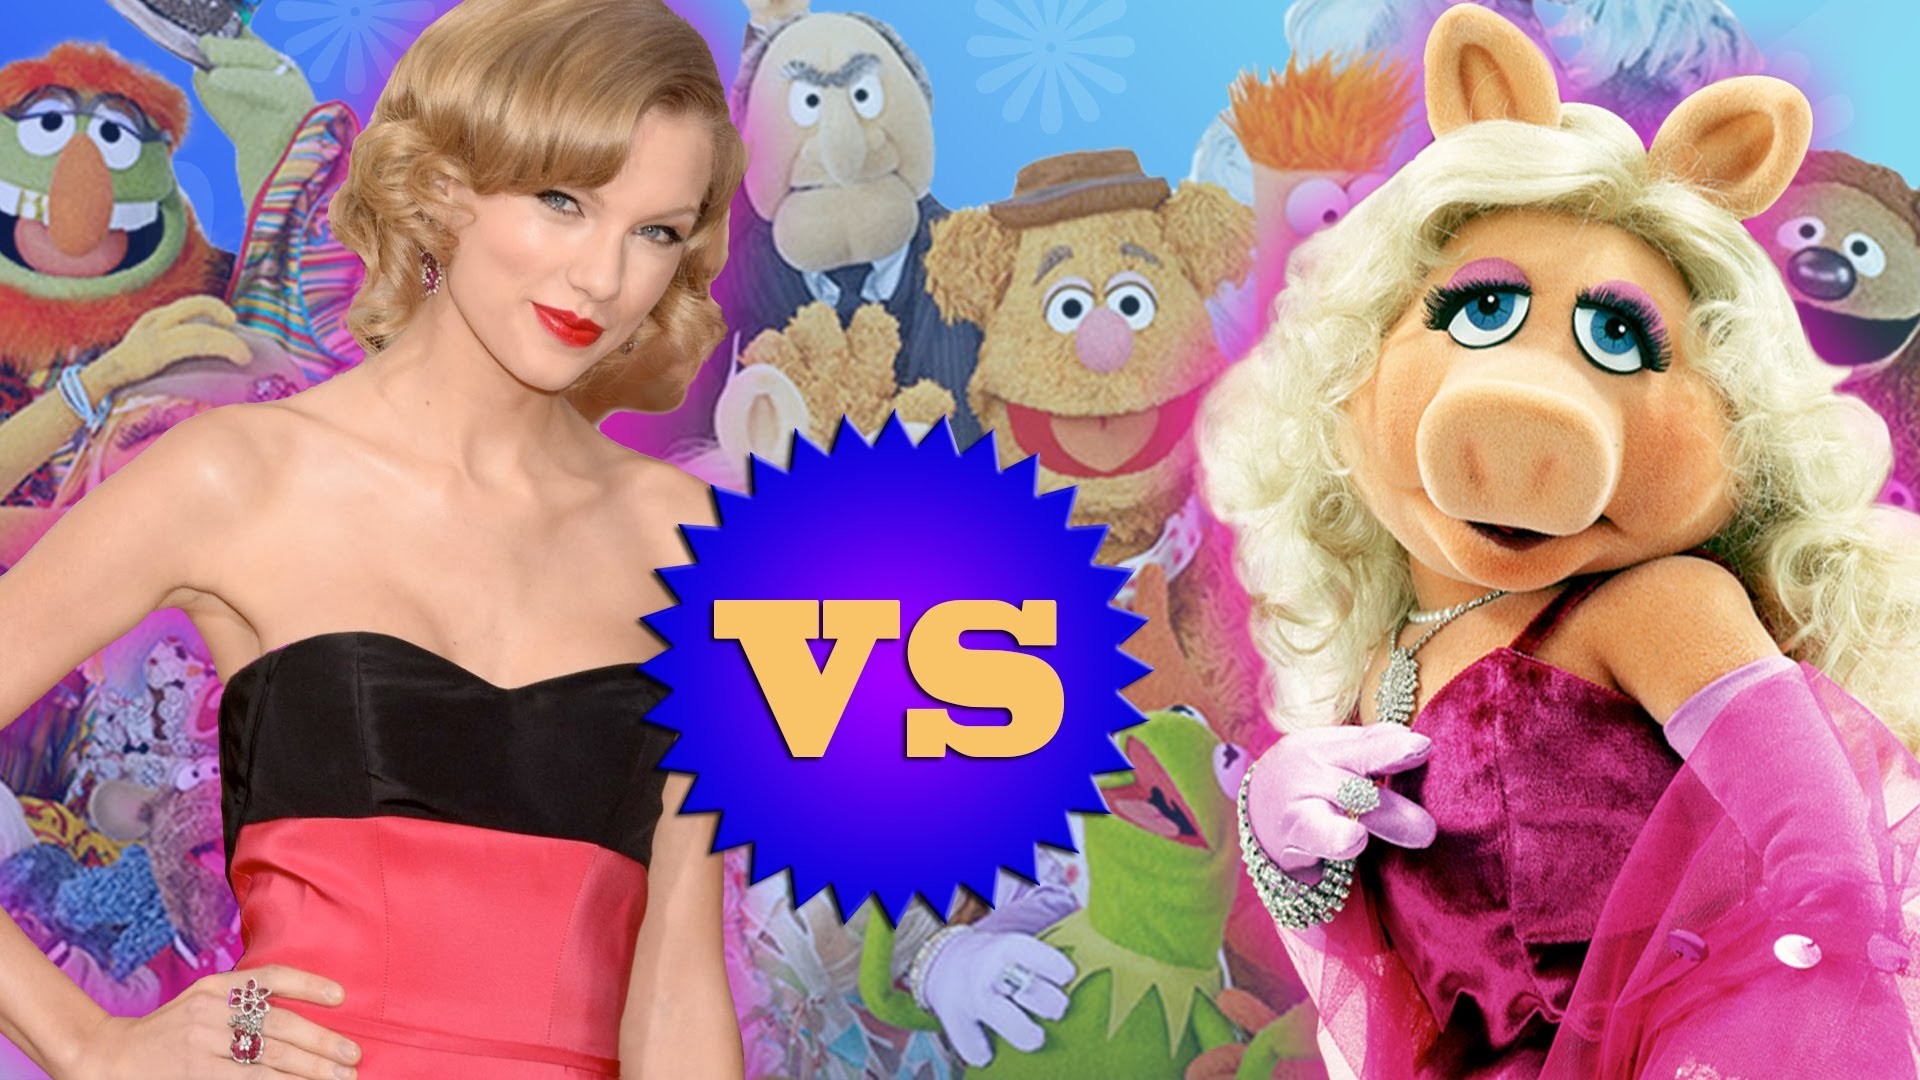 1920x1080 Miss Piggy! Who Wore it Better? - YouTube